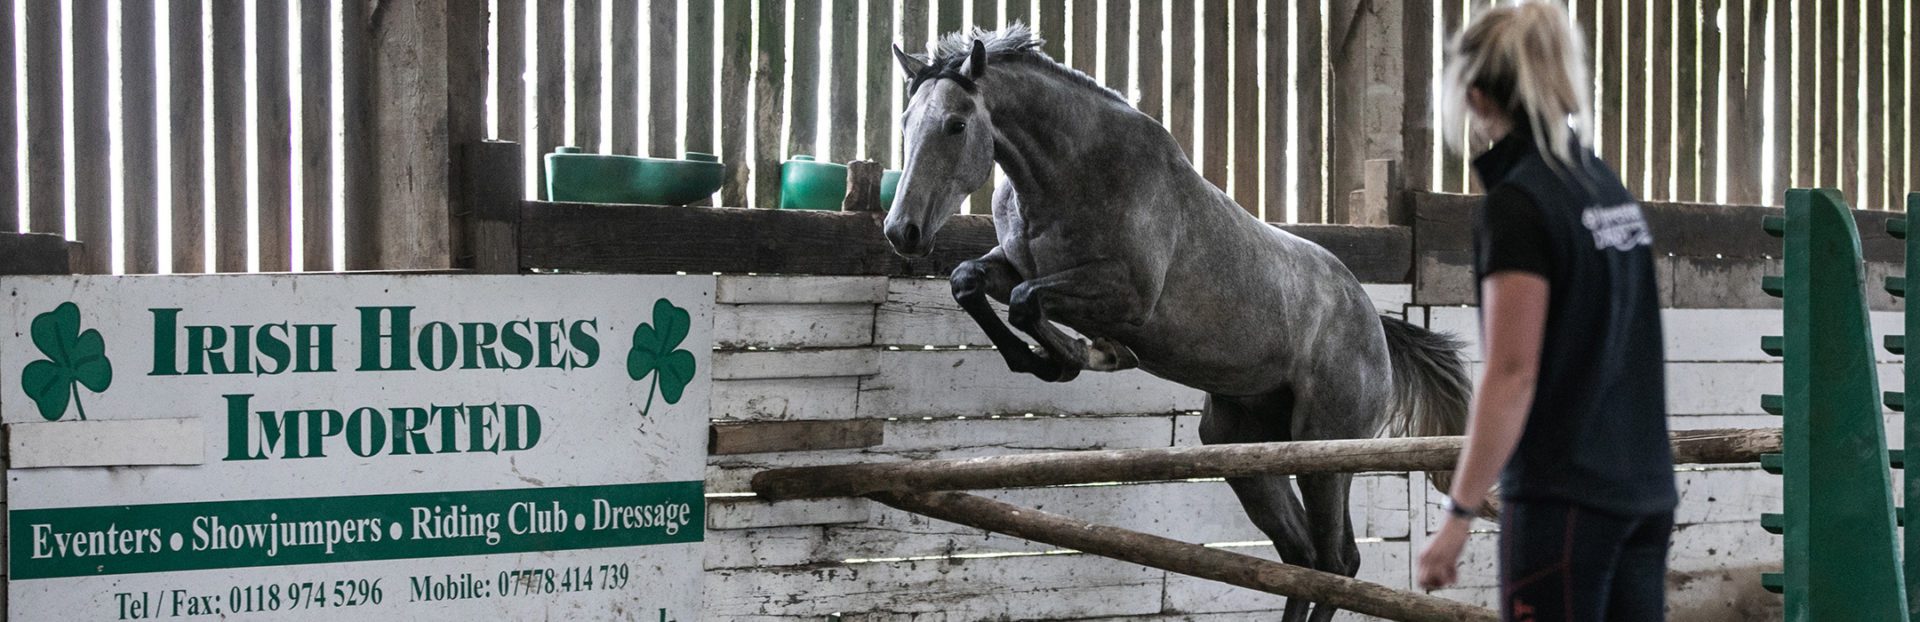 Image of a horse jumping with female trainer looking on